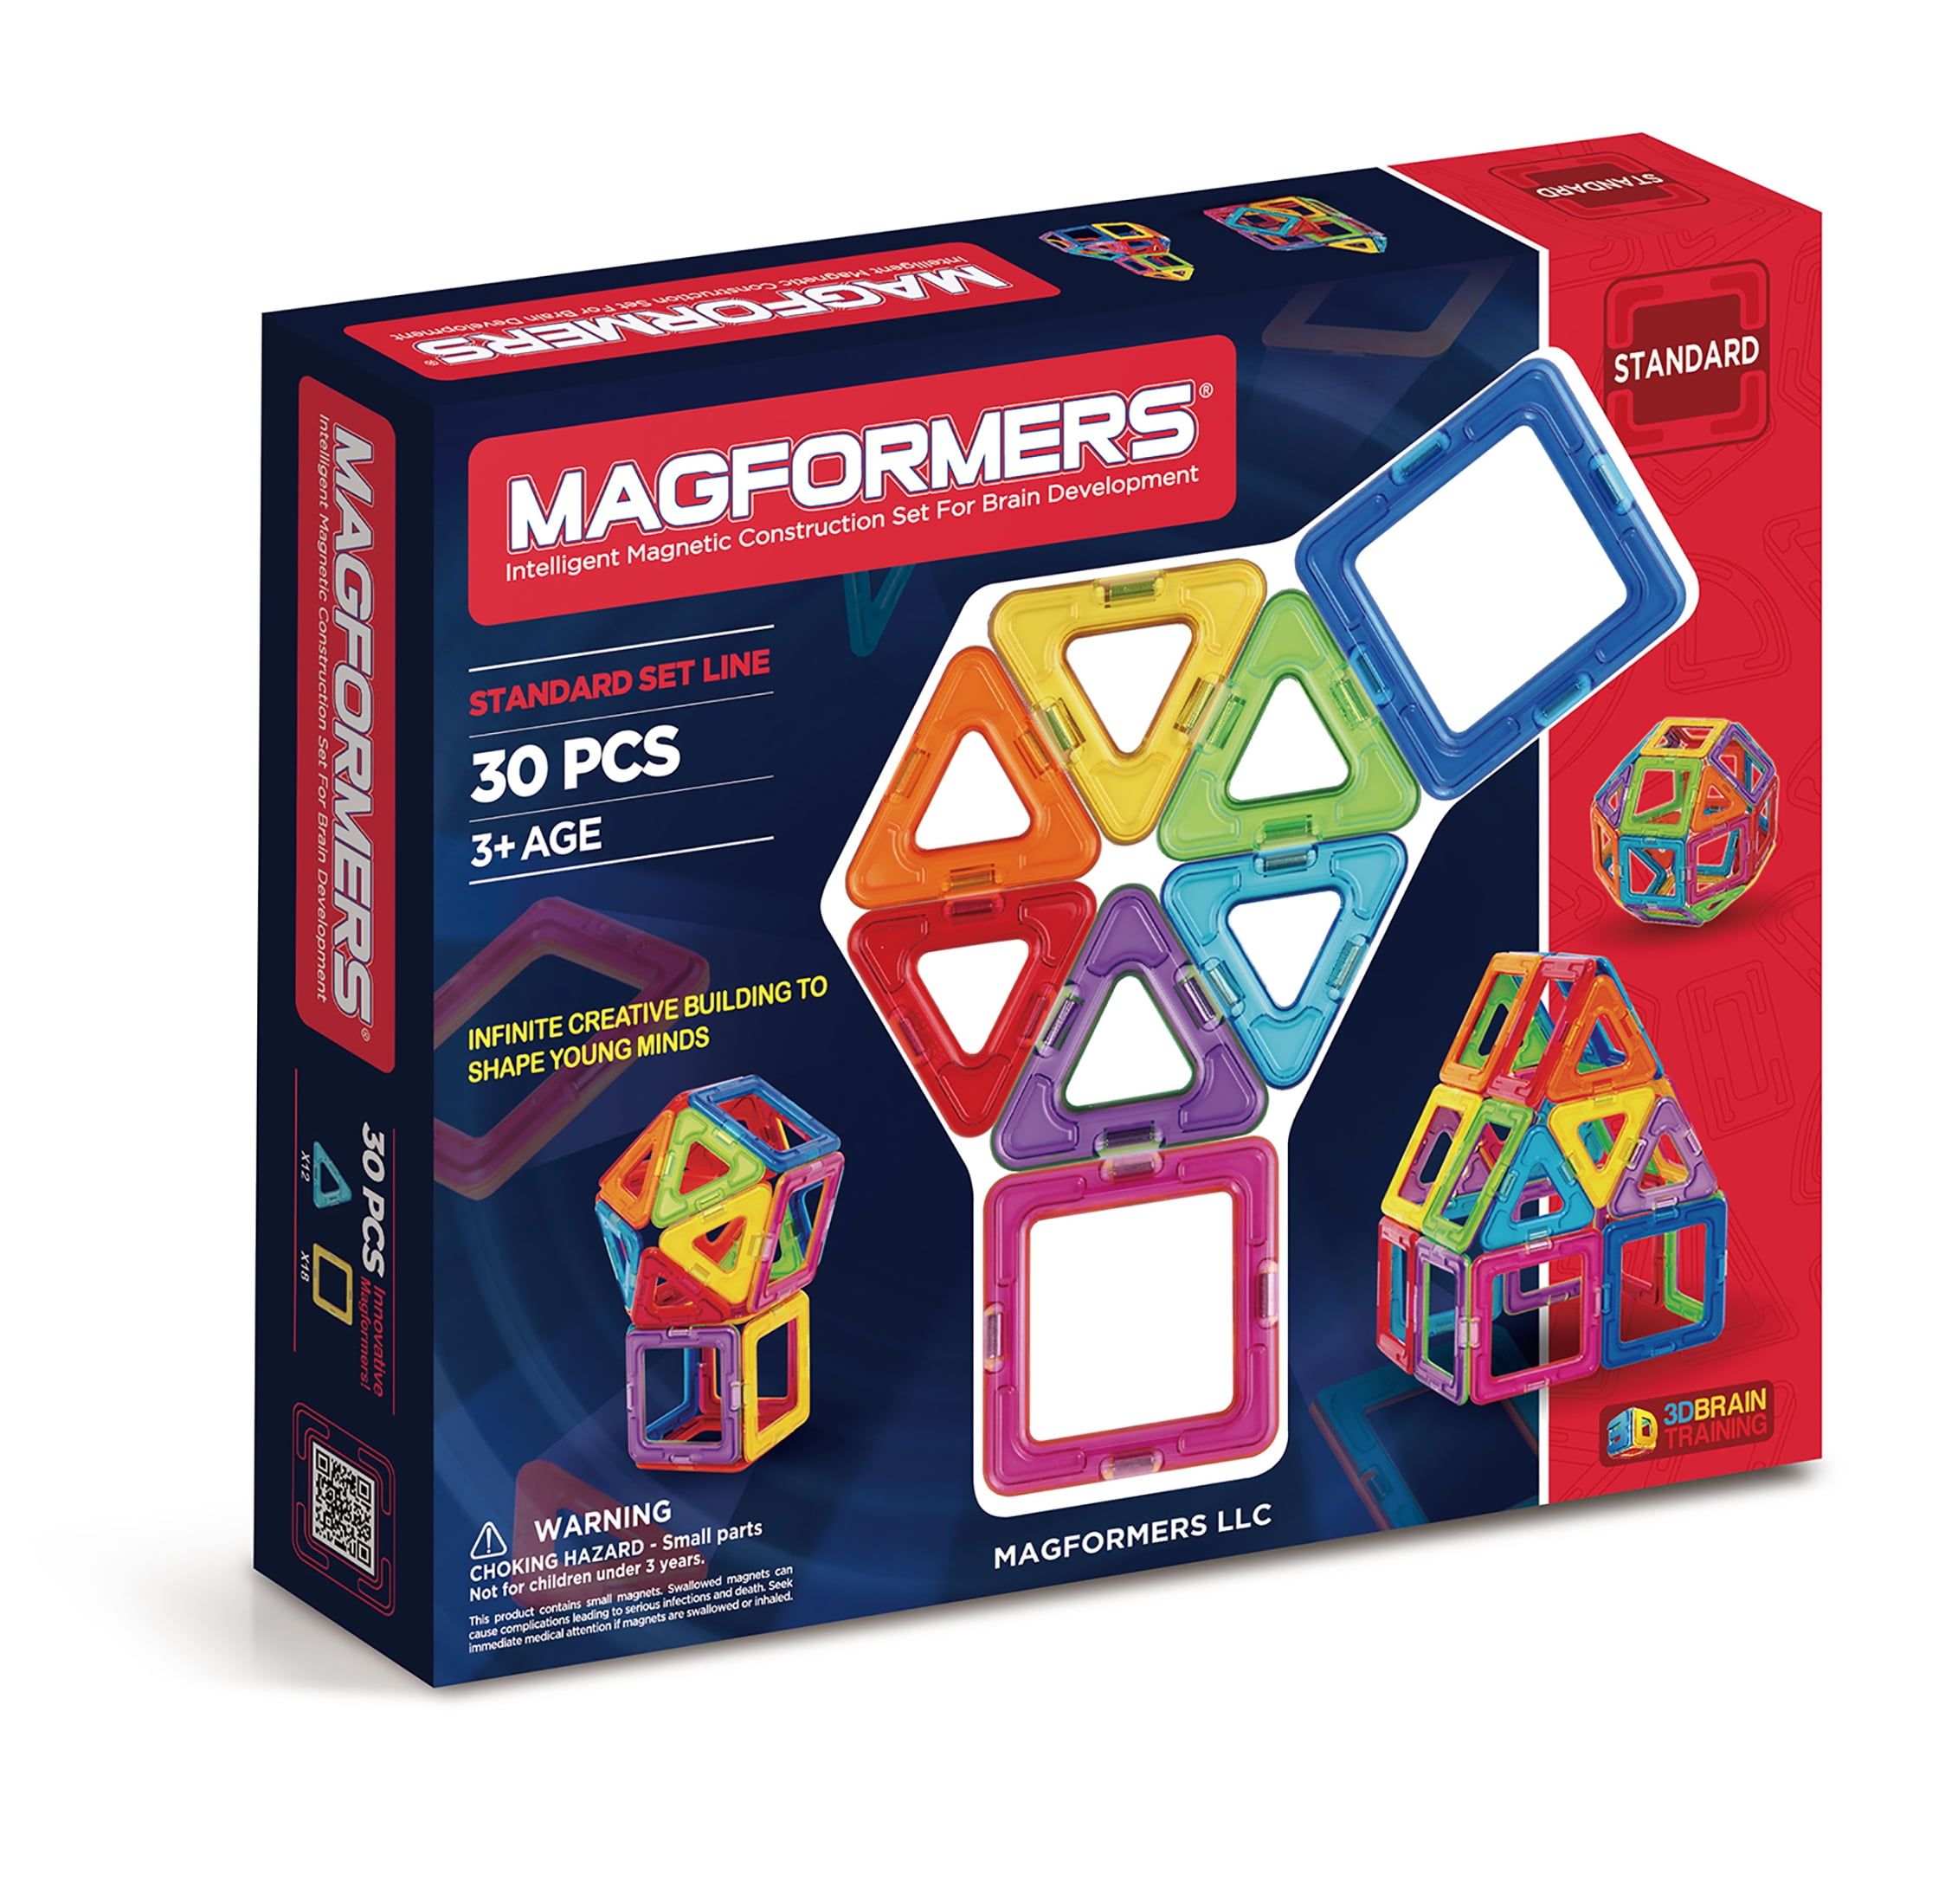 MAGFORMERS magformers magnetic building sets with 2 Follow Me Books 